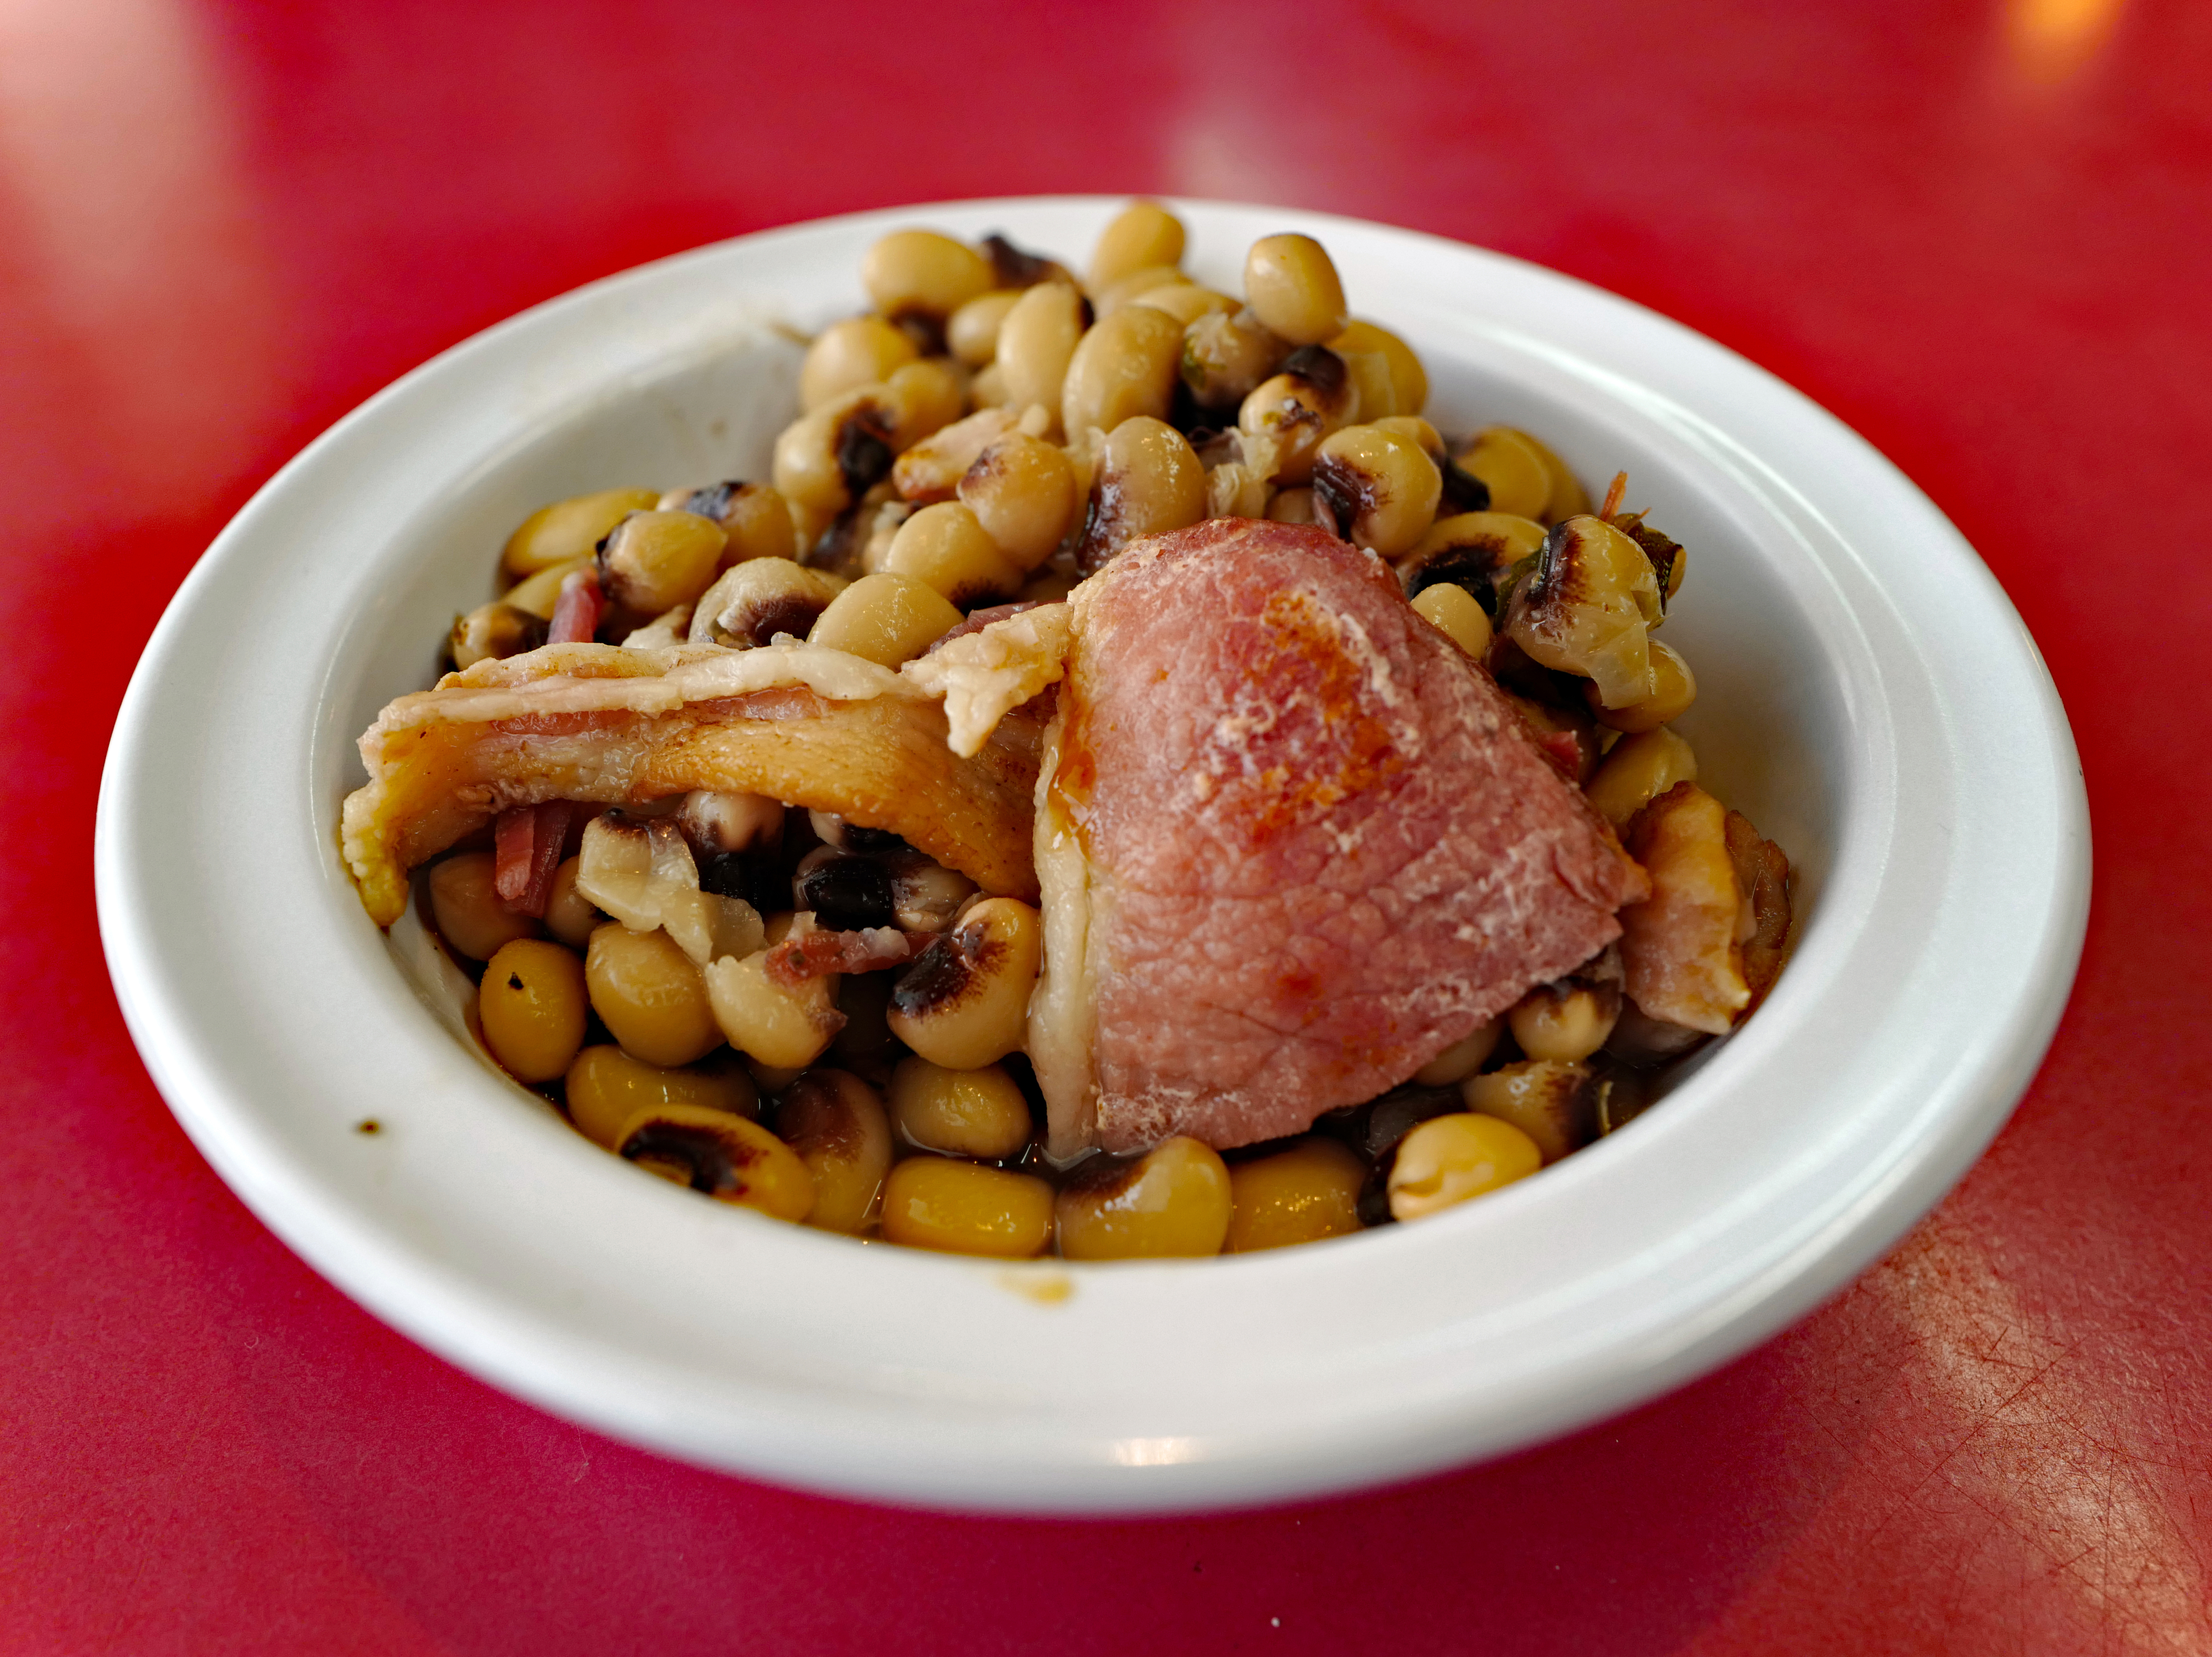 Bowl of blackeyed peas includes slices of pink ham